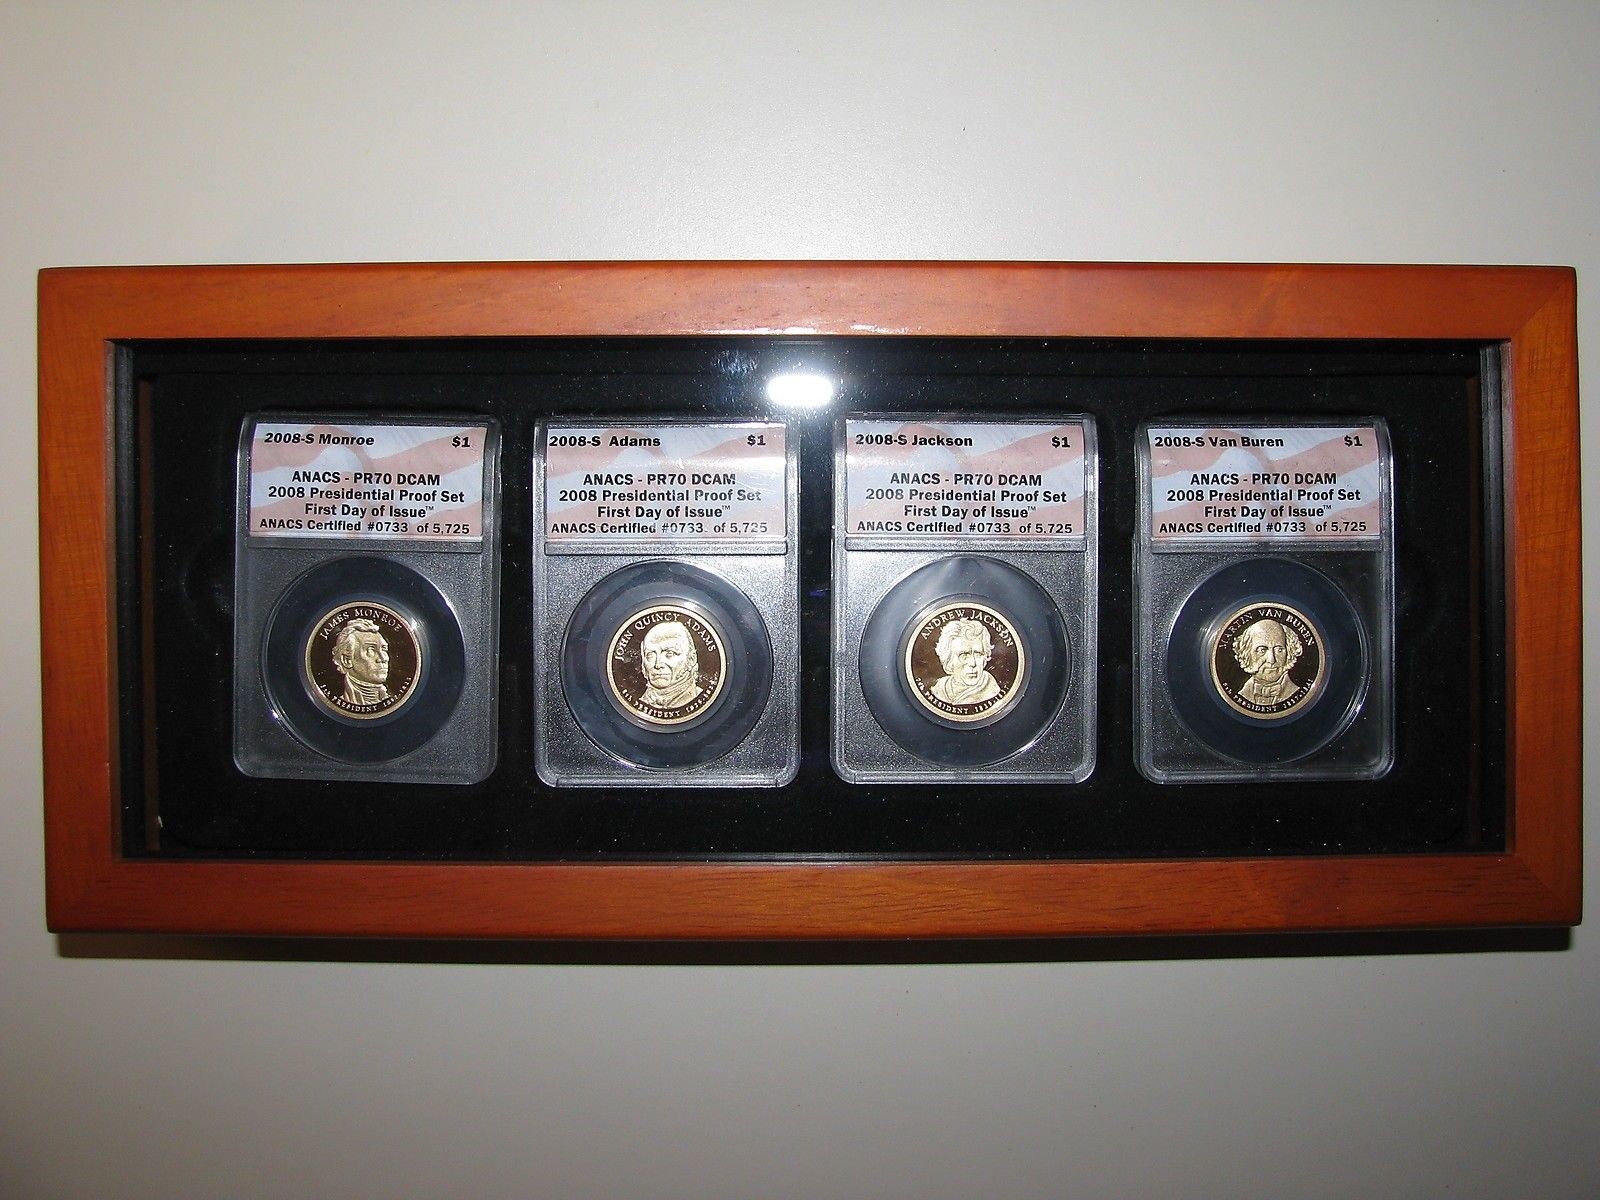 2008 PRESIDENTIAL PROOF SET ANACS PR70 DCAM FIRST DAY OF ISSUE SET 733 OF 5725 - $95.00